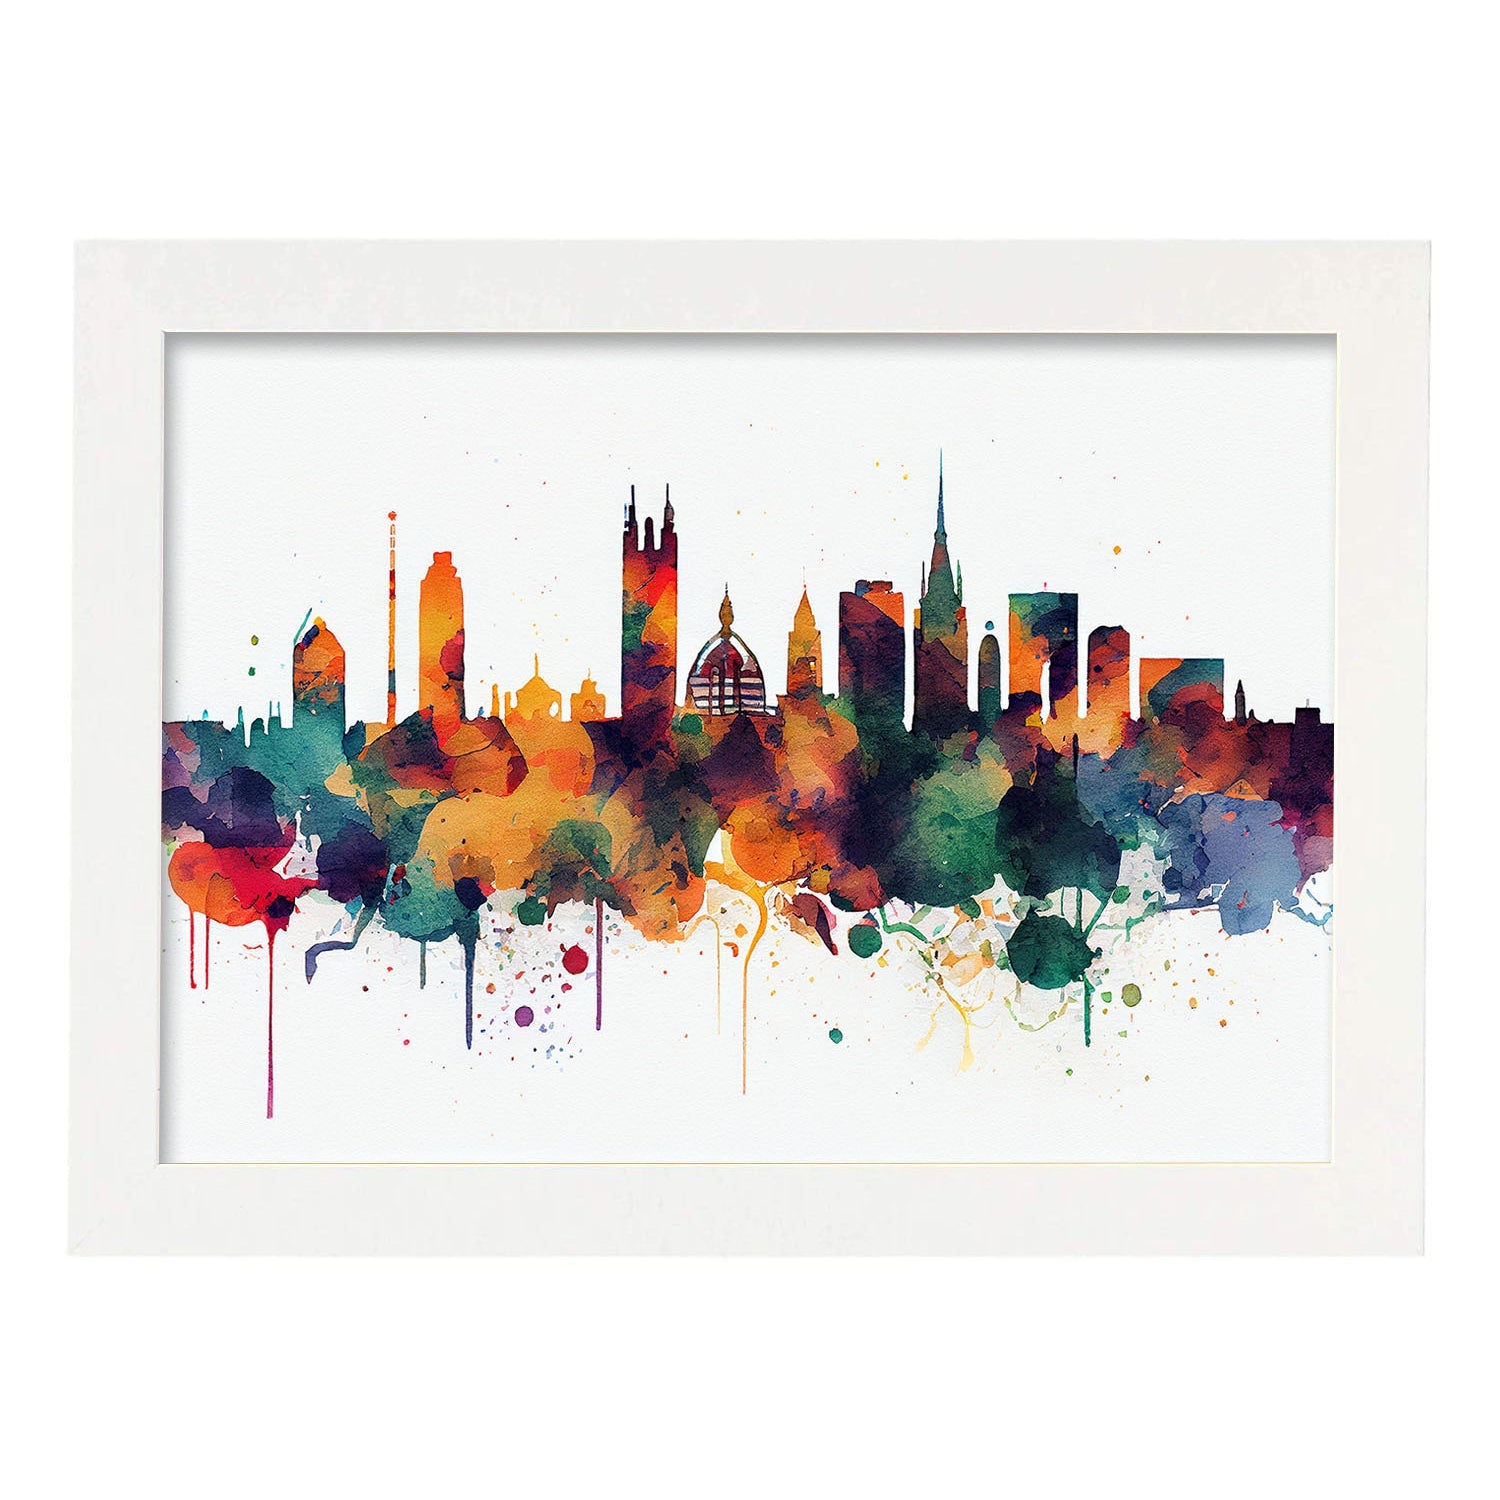 Nacnic watercolor of a skyline of the city of Manchester. Aesthetic Wall Art Prints for Bedroom or Living Room Design.-Artwork-Nacnic-A4-Marco Blanco-Nacnic Estudio SL